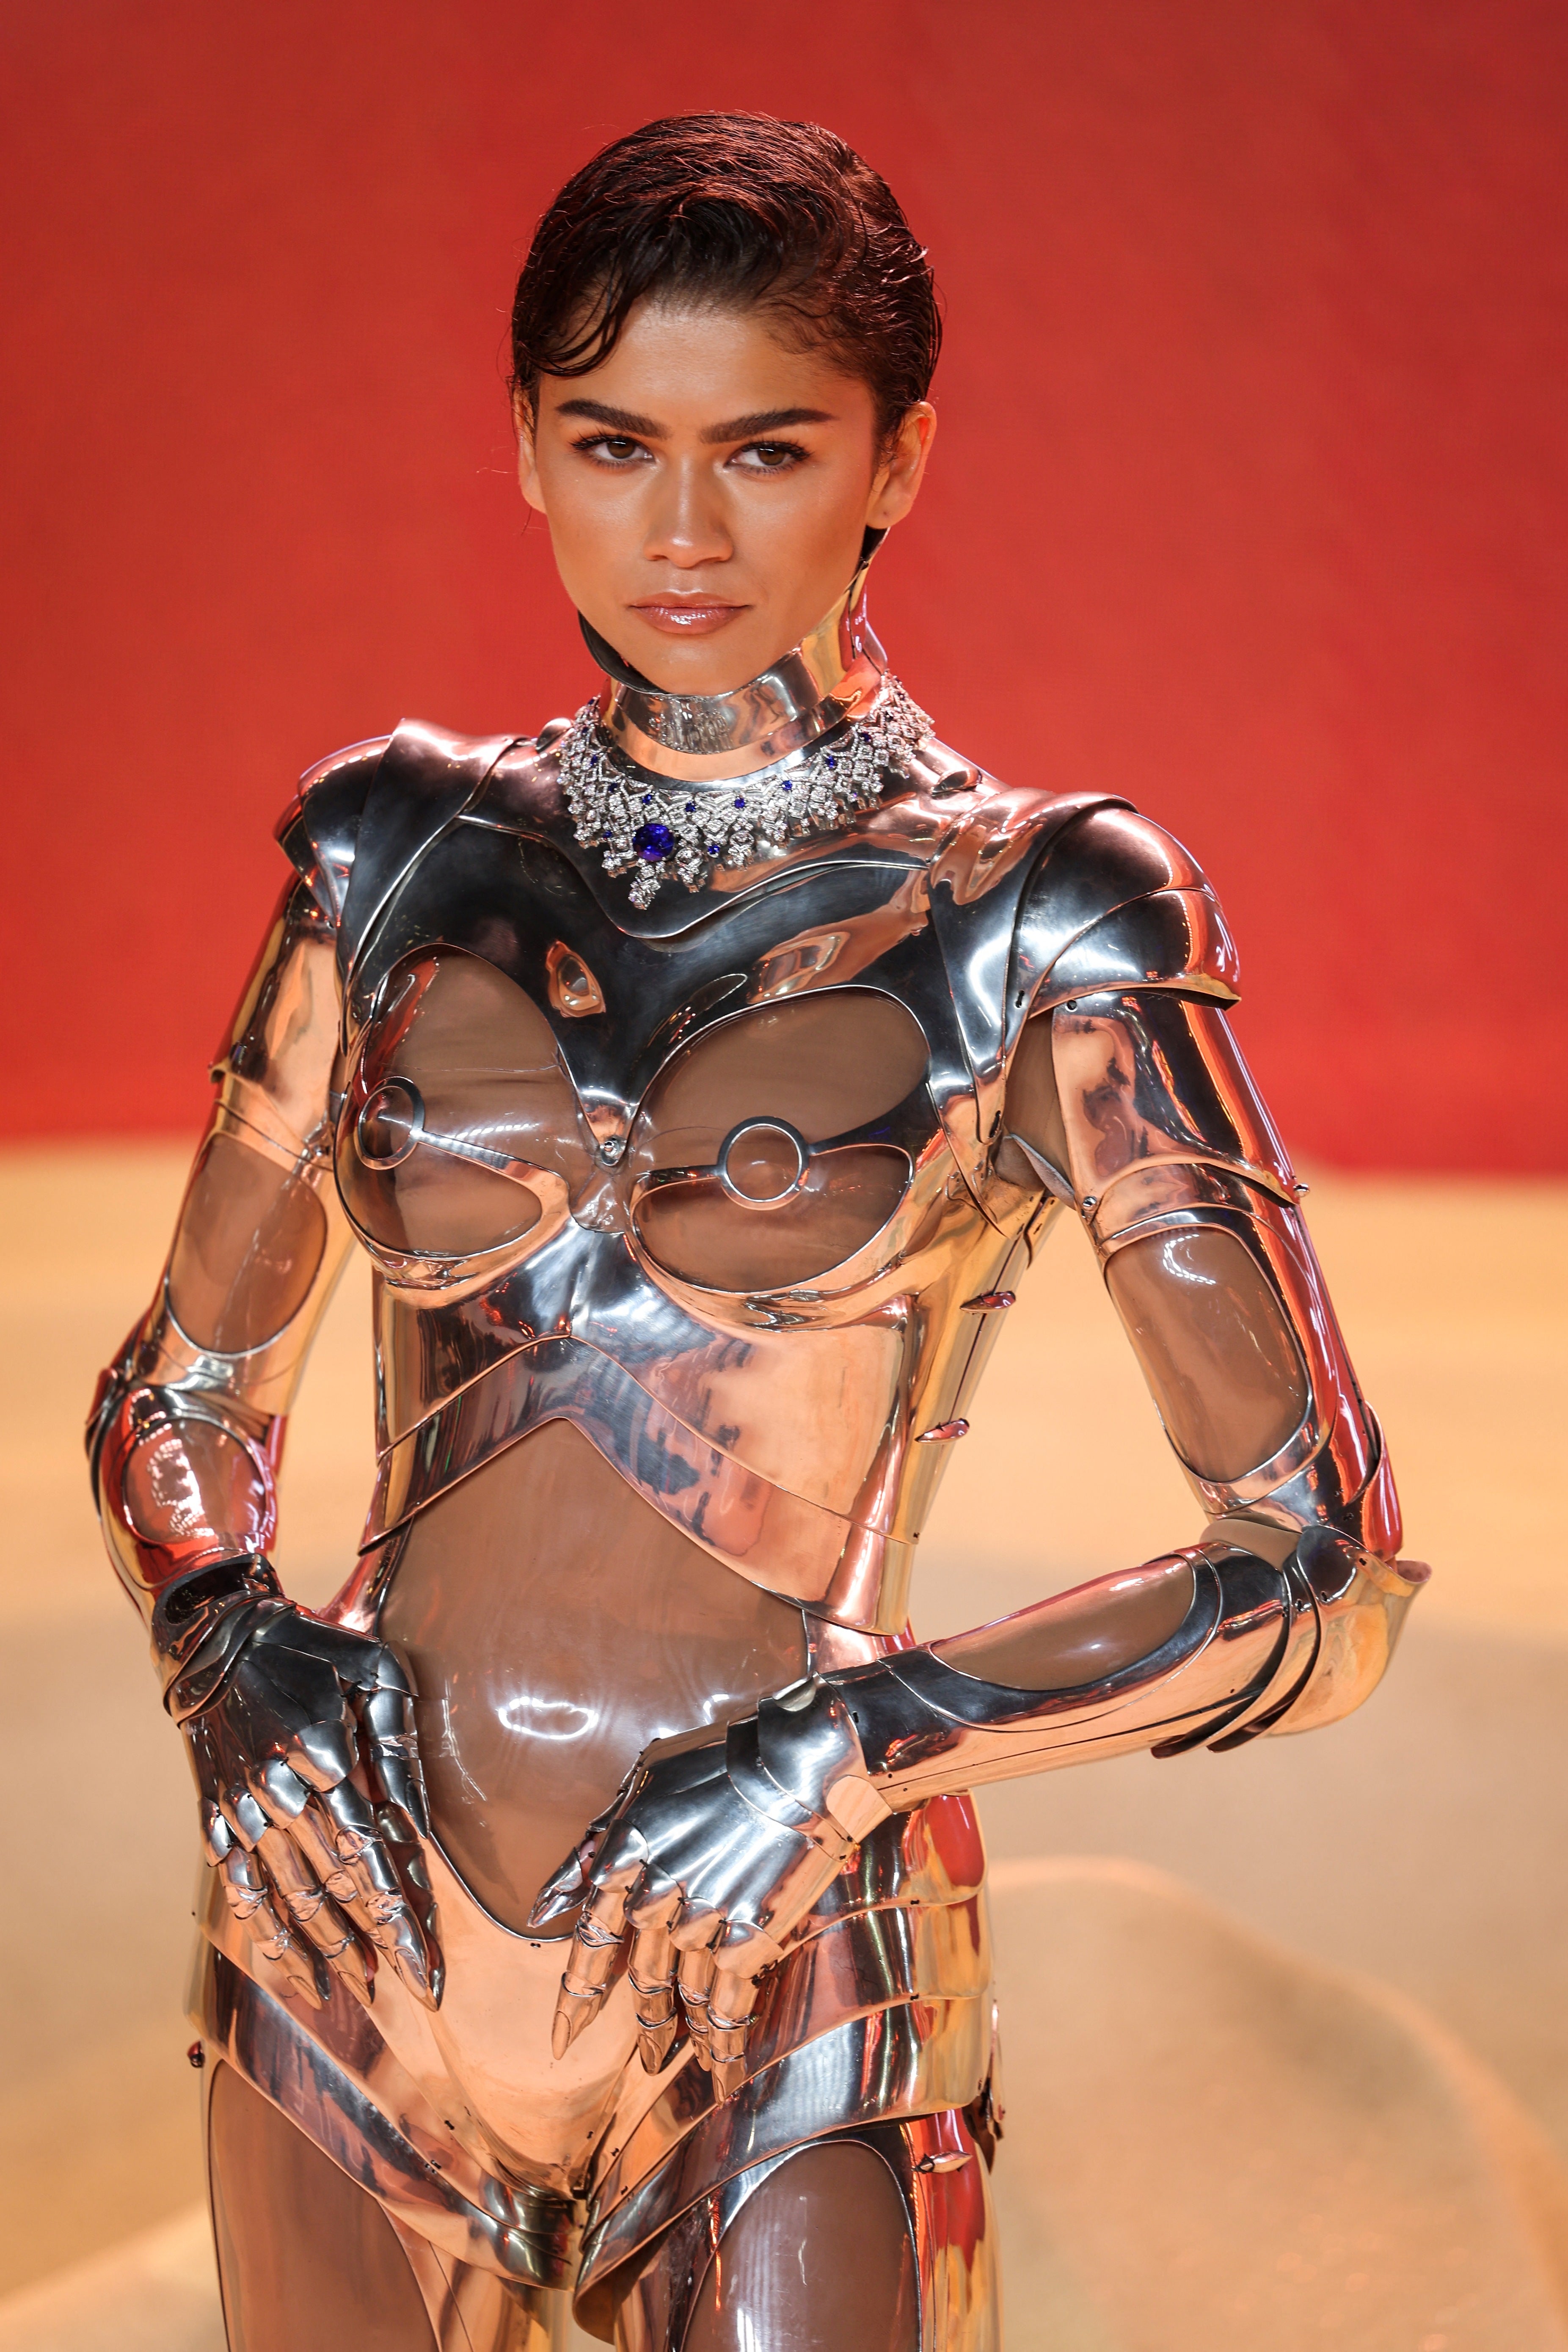 Zendaya was praised for a futuristic outfit styled by Law Roach